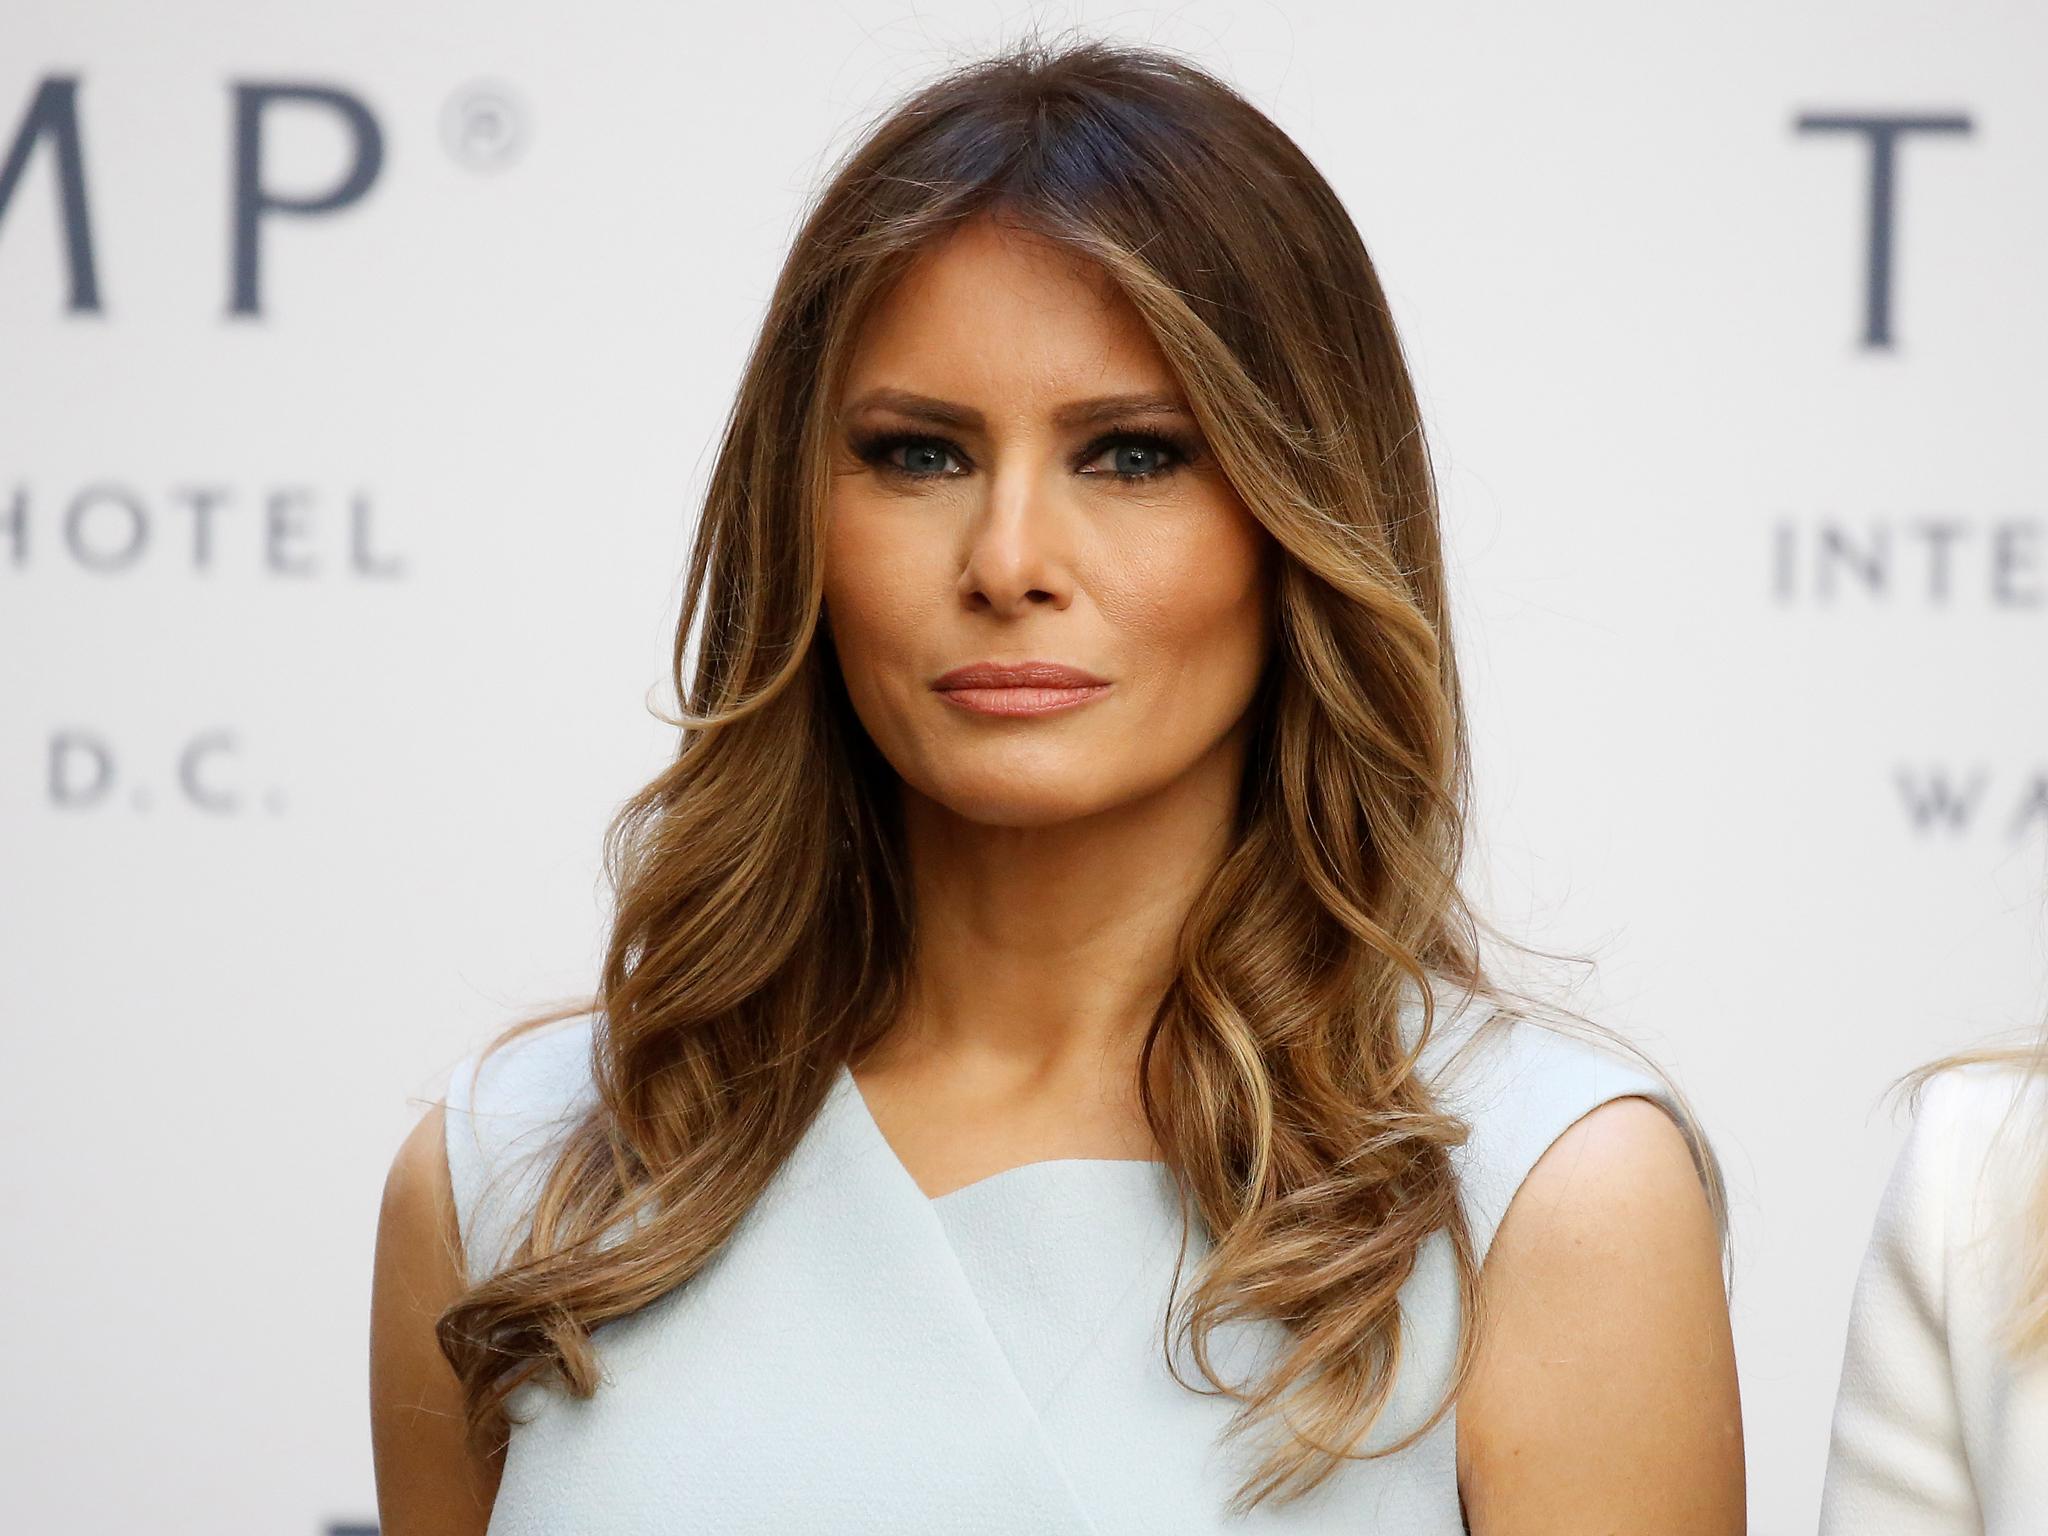 Melania Trump worked illegally during first weeks in US, the AP reports ...